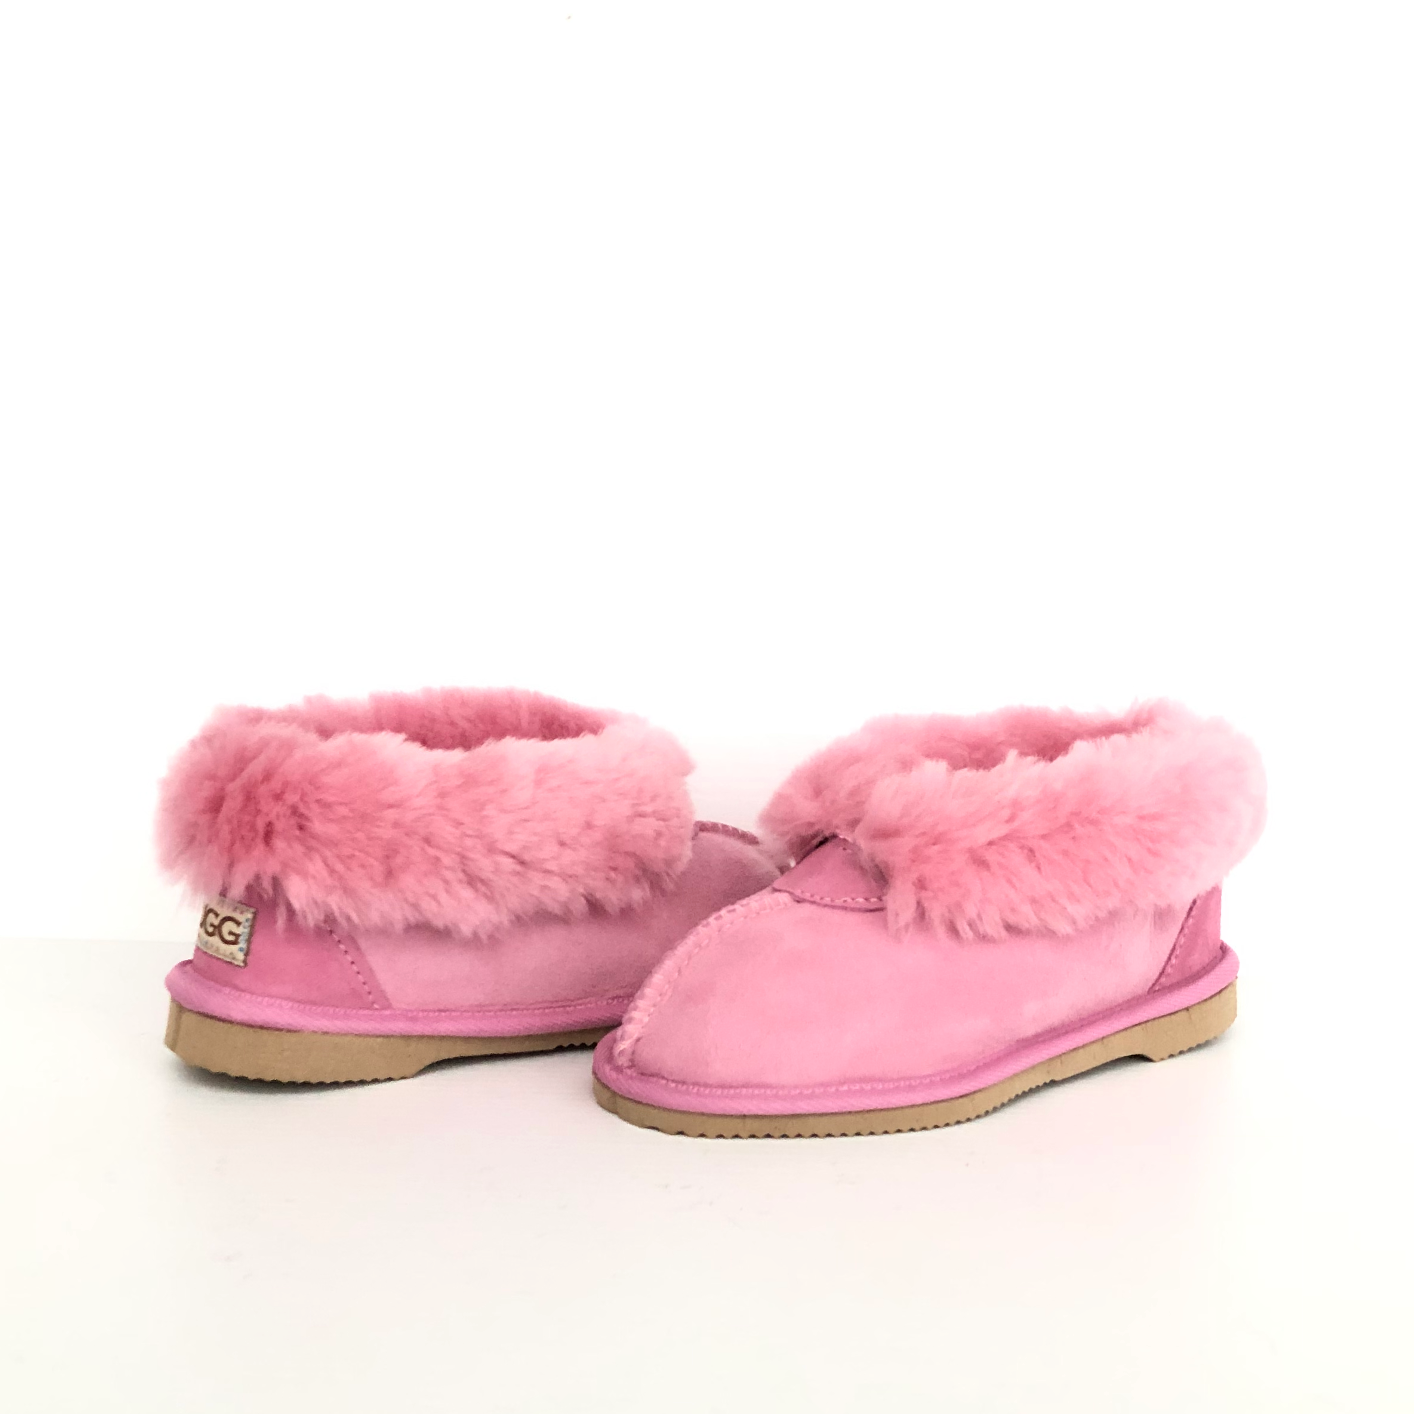 Kid's Ugg Slippers, with sheepskin rolled out at the top in pink